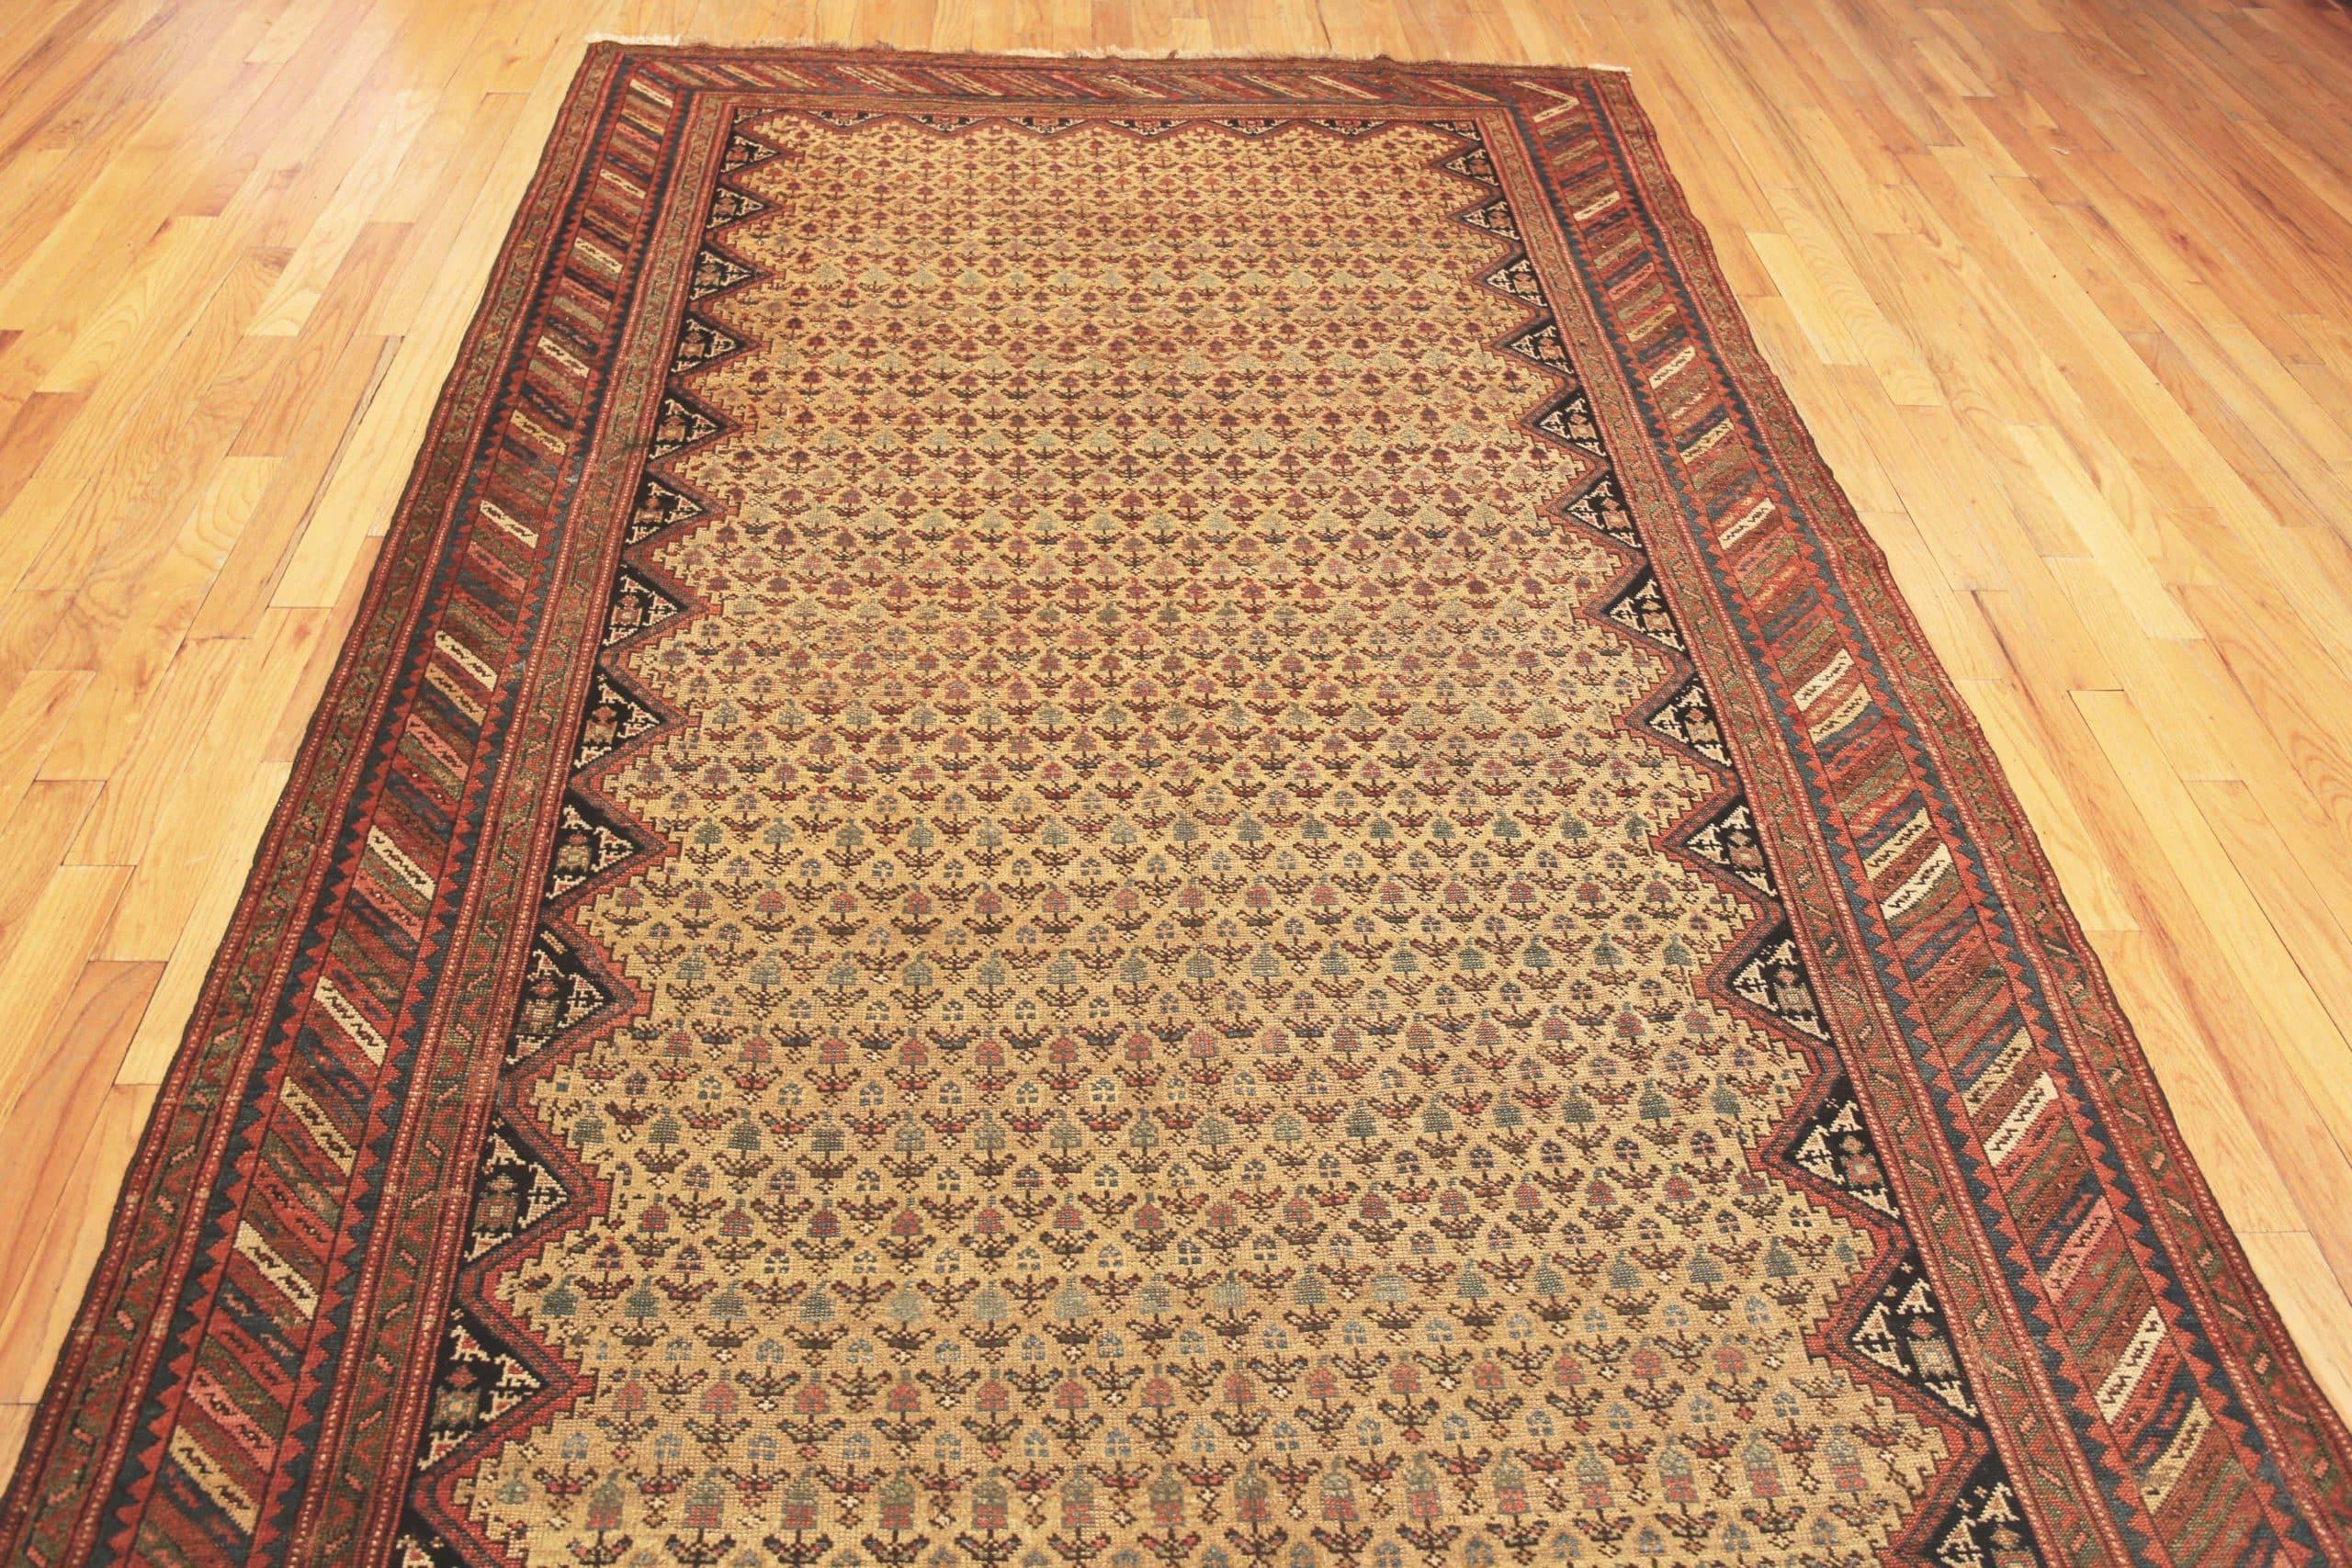 Tribal Antique Persian Kurdish Gallery Size Rug, Country of Origin: Persia, Circa date: 1900. Size: 6 ft 9 in x 19 ft 10 in (2.06 m x 6.05 m)

